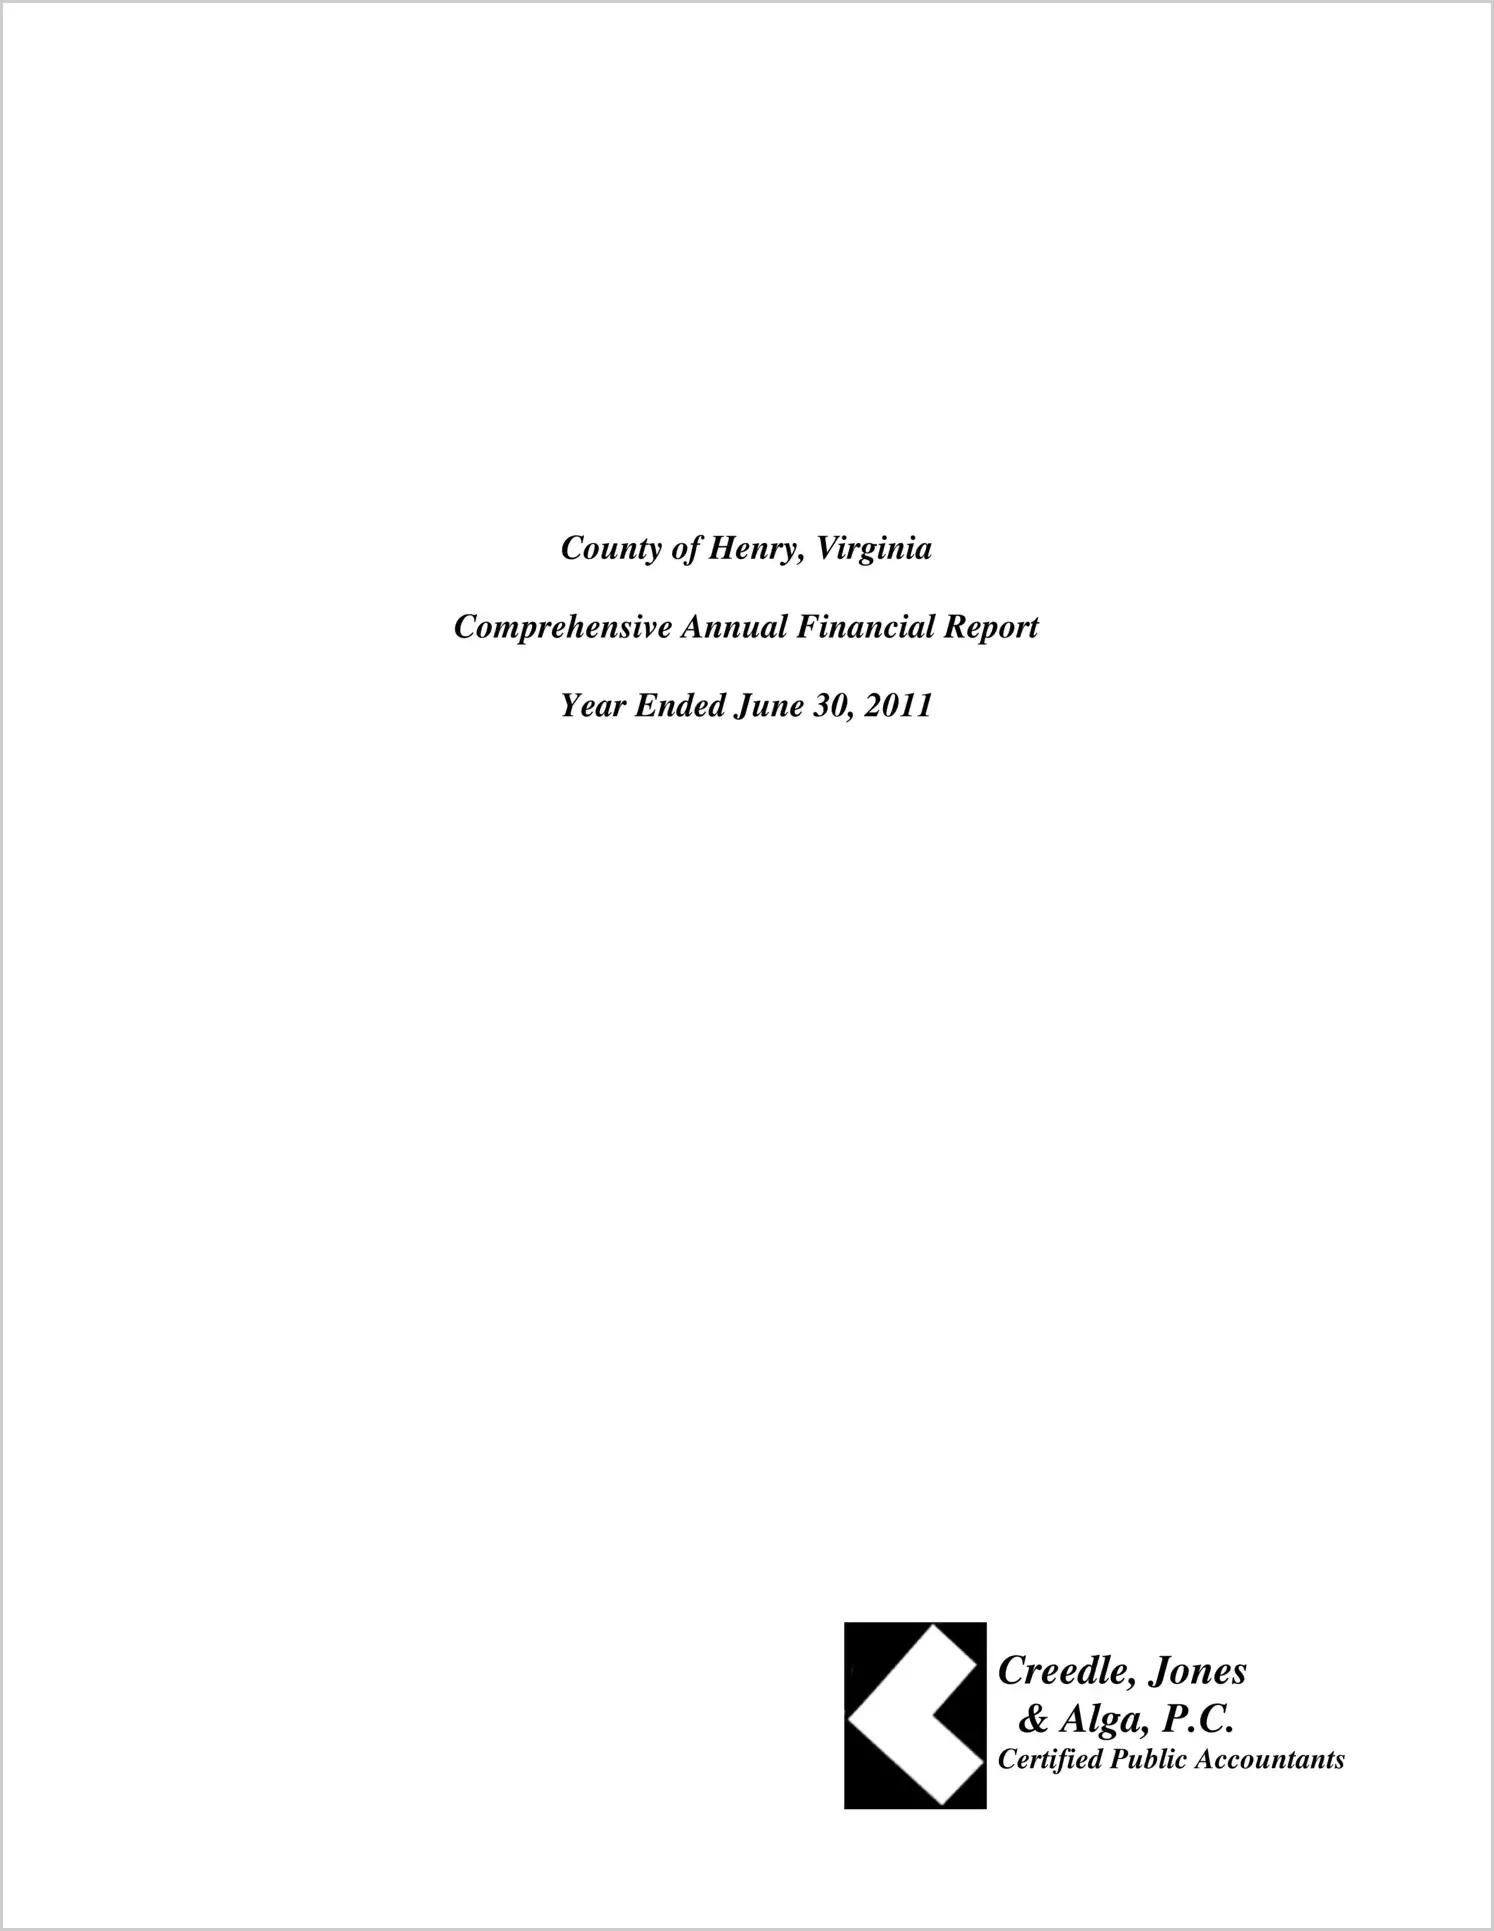 2011 Annual Financial Report for County of Henry